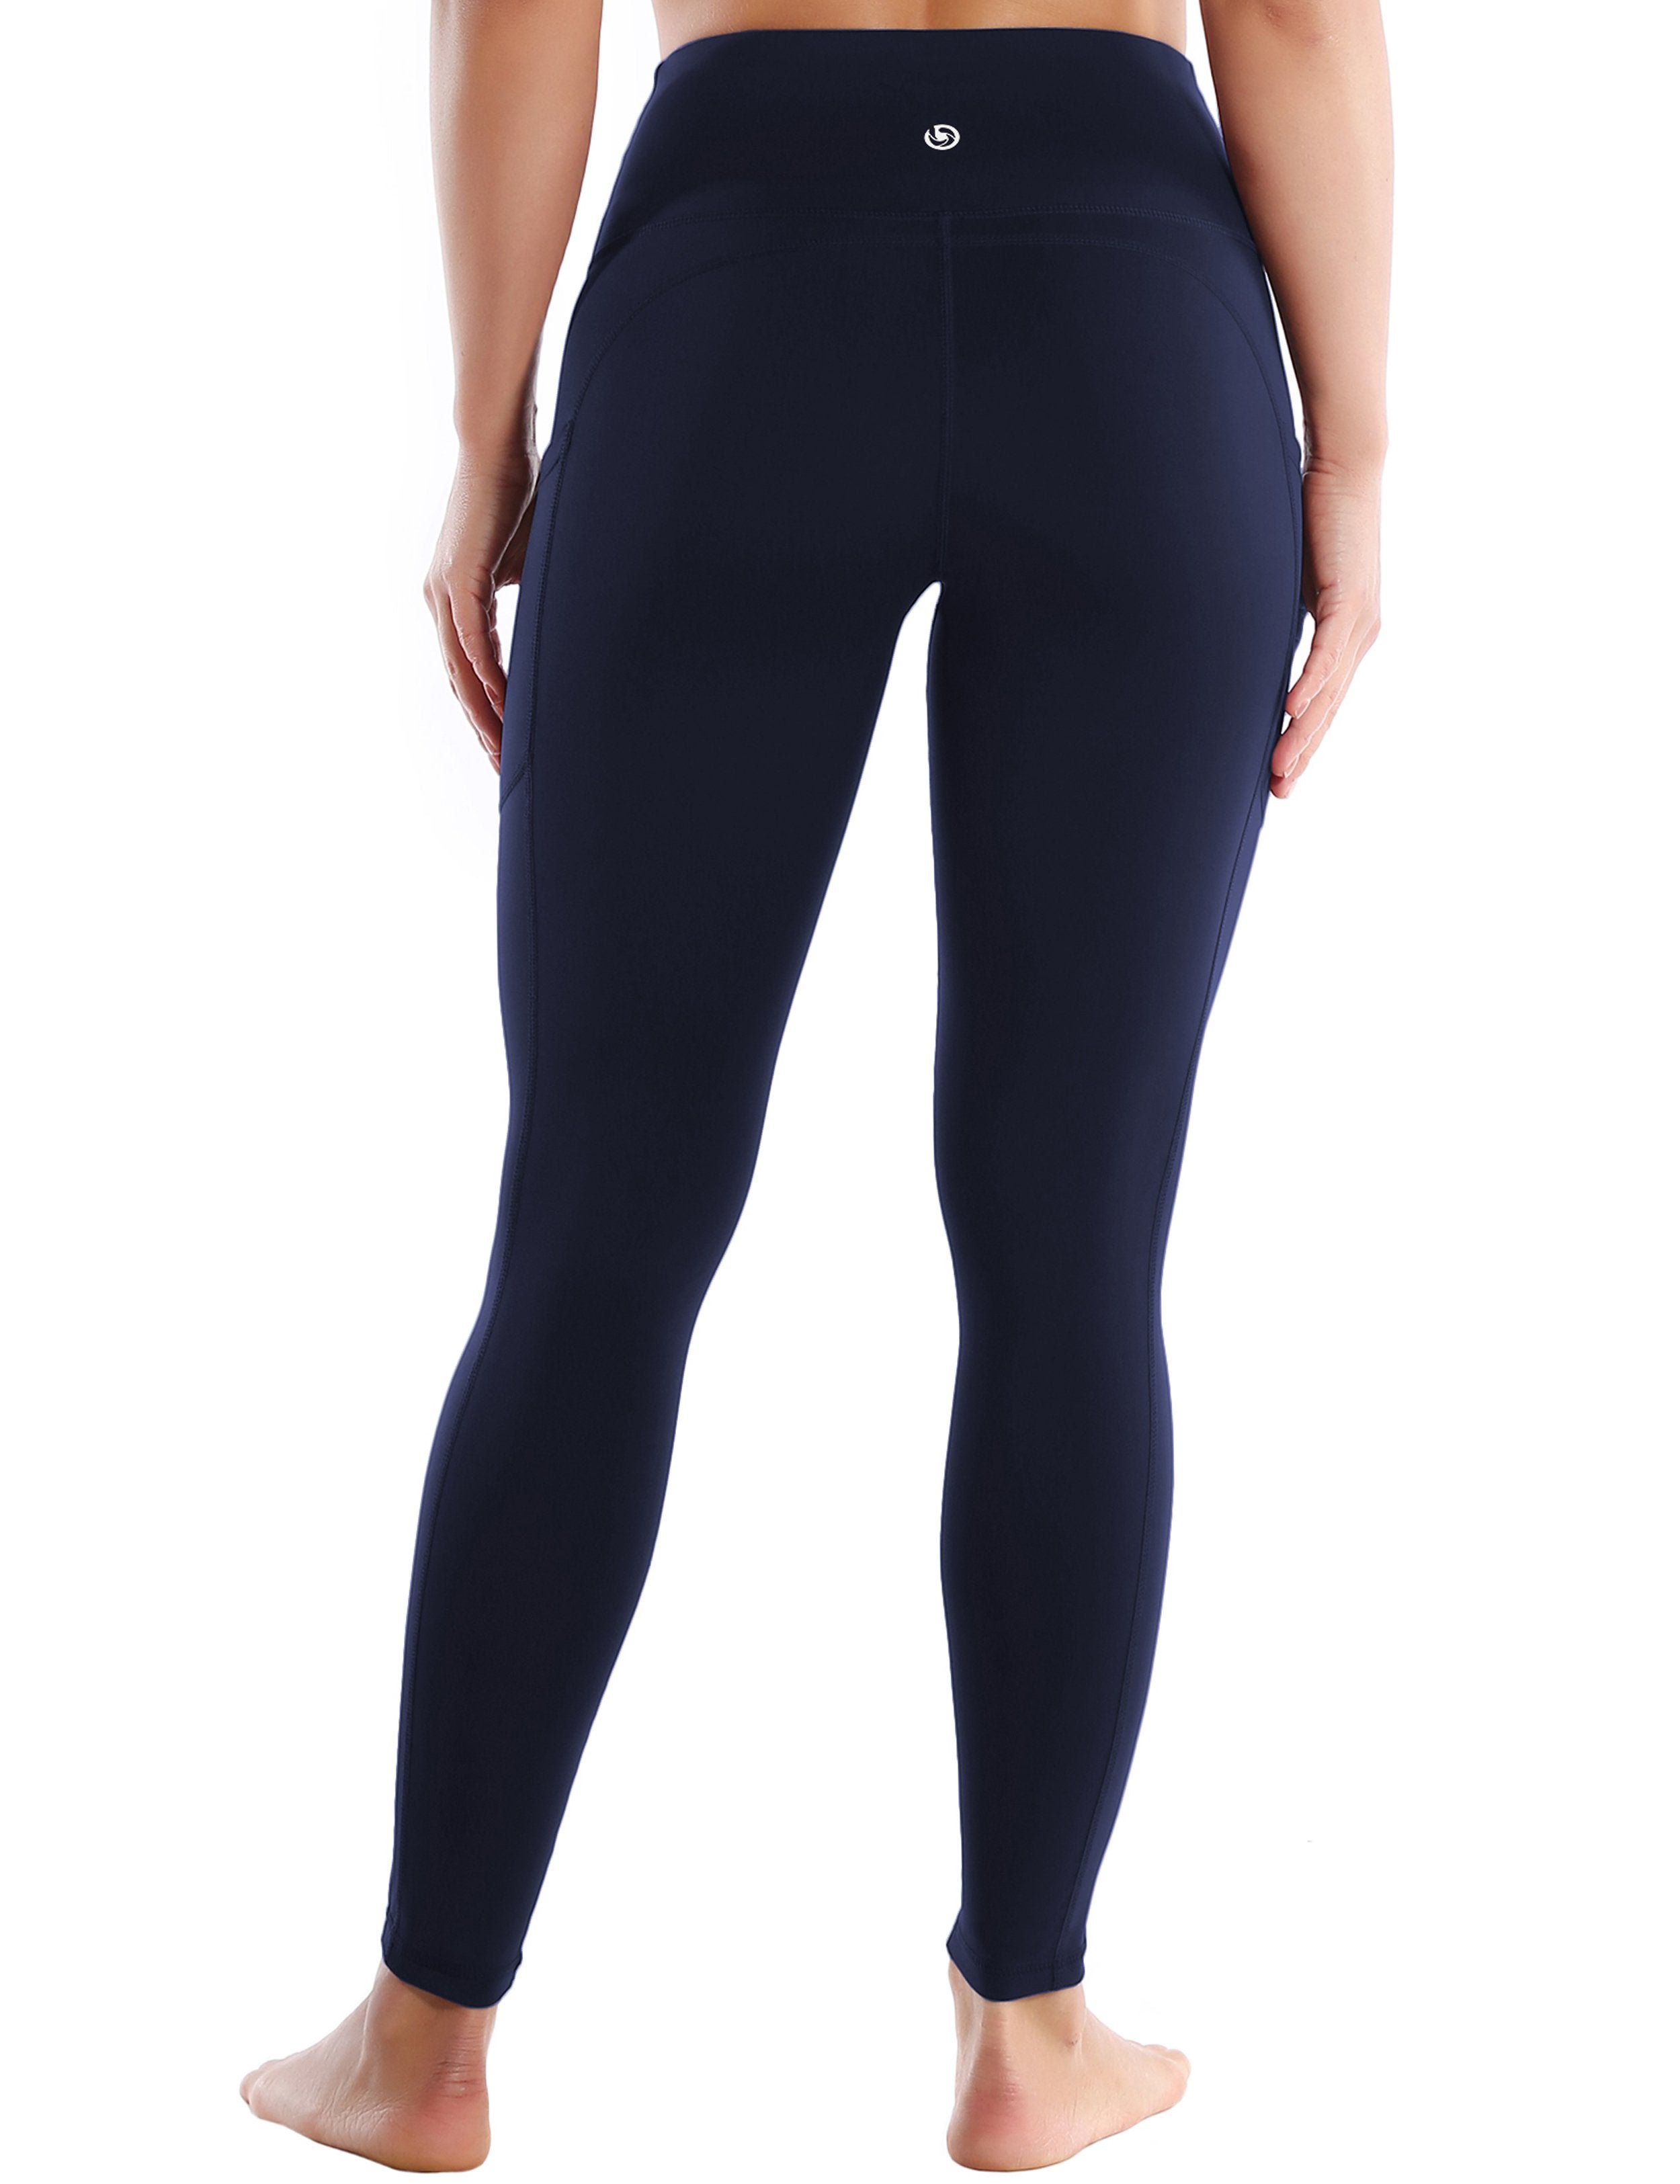 Hip Line Side Pockets Pilates Pants darknavy Sexy Hip Line Side Pockets 75%Nylon/25%Spandex Fabric doesn't attract lint easily 4-way stretch No see-through Moisture-wicking Tummy control Inner pocket Two lengths